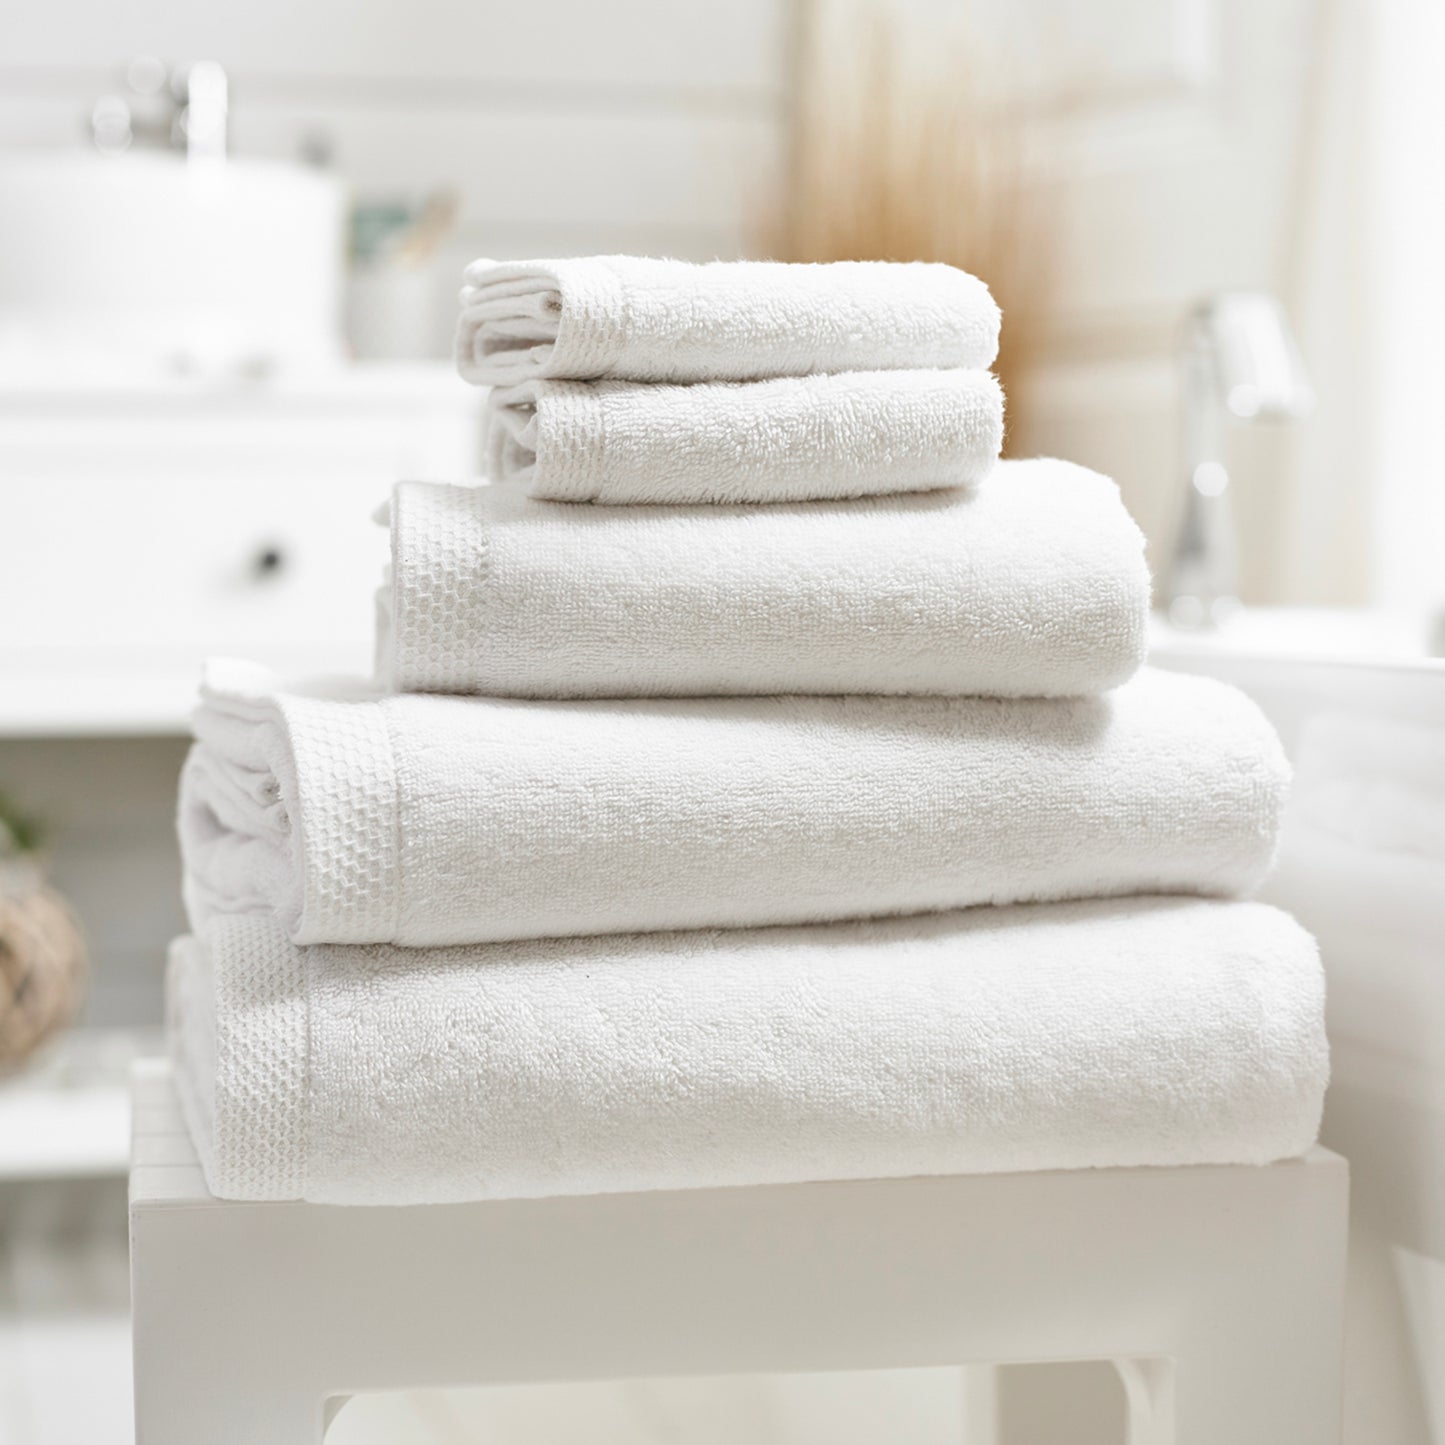 The Lyndon Company Egyptian Spa Low Twist White Cotton 700gsm Towels